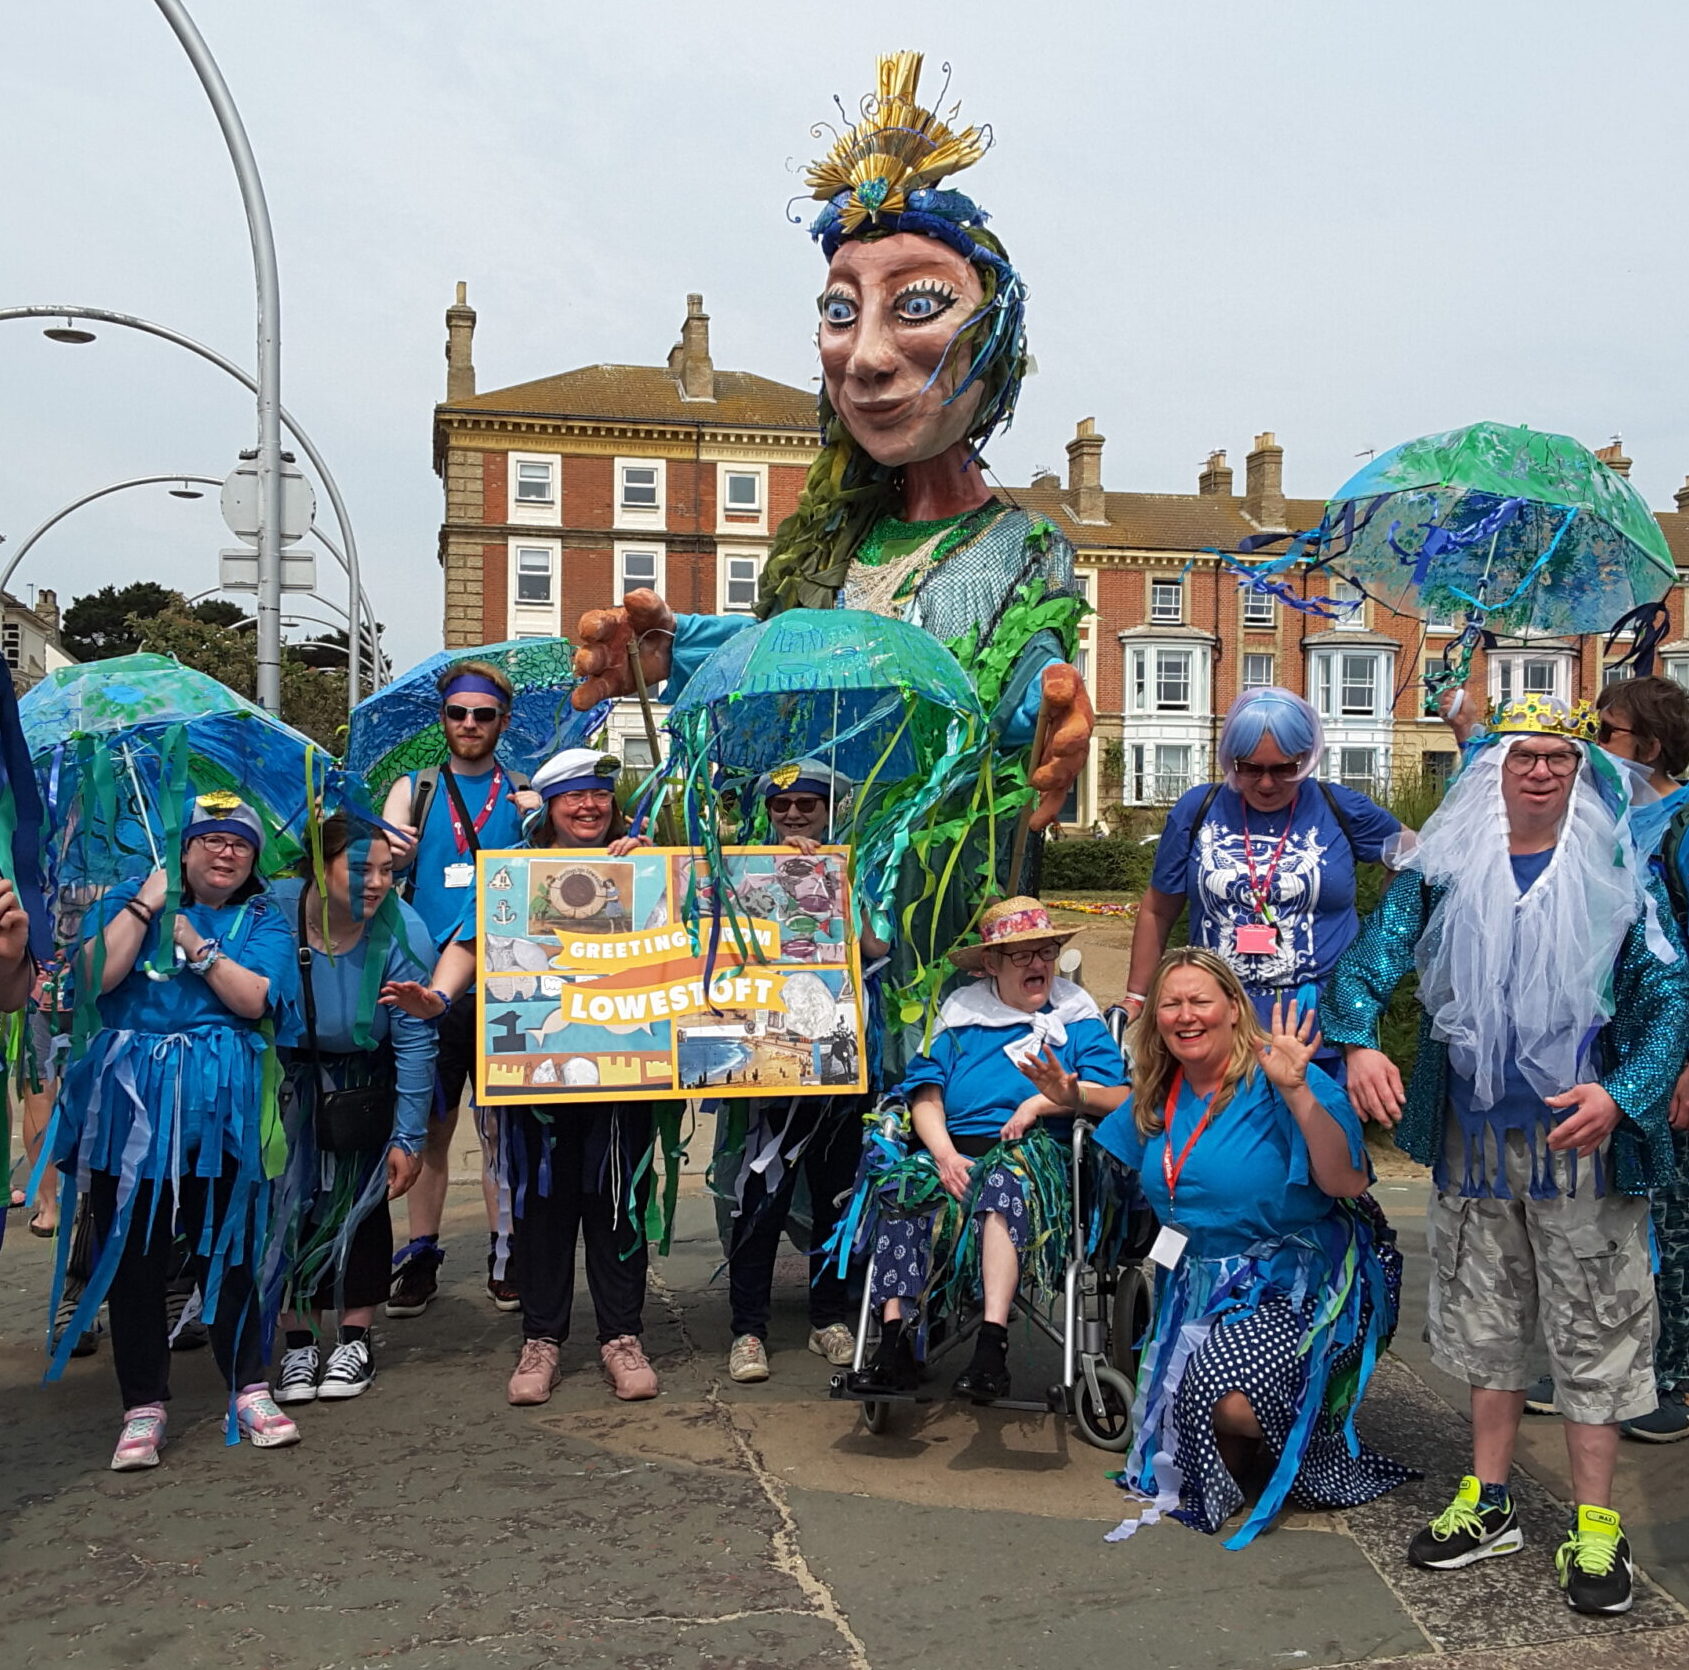 The Brave Artists, dressed in fancy dress to resemble sea creatures, greet the massive puppet, Sol, with an equally outsized postcard